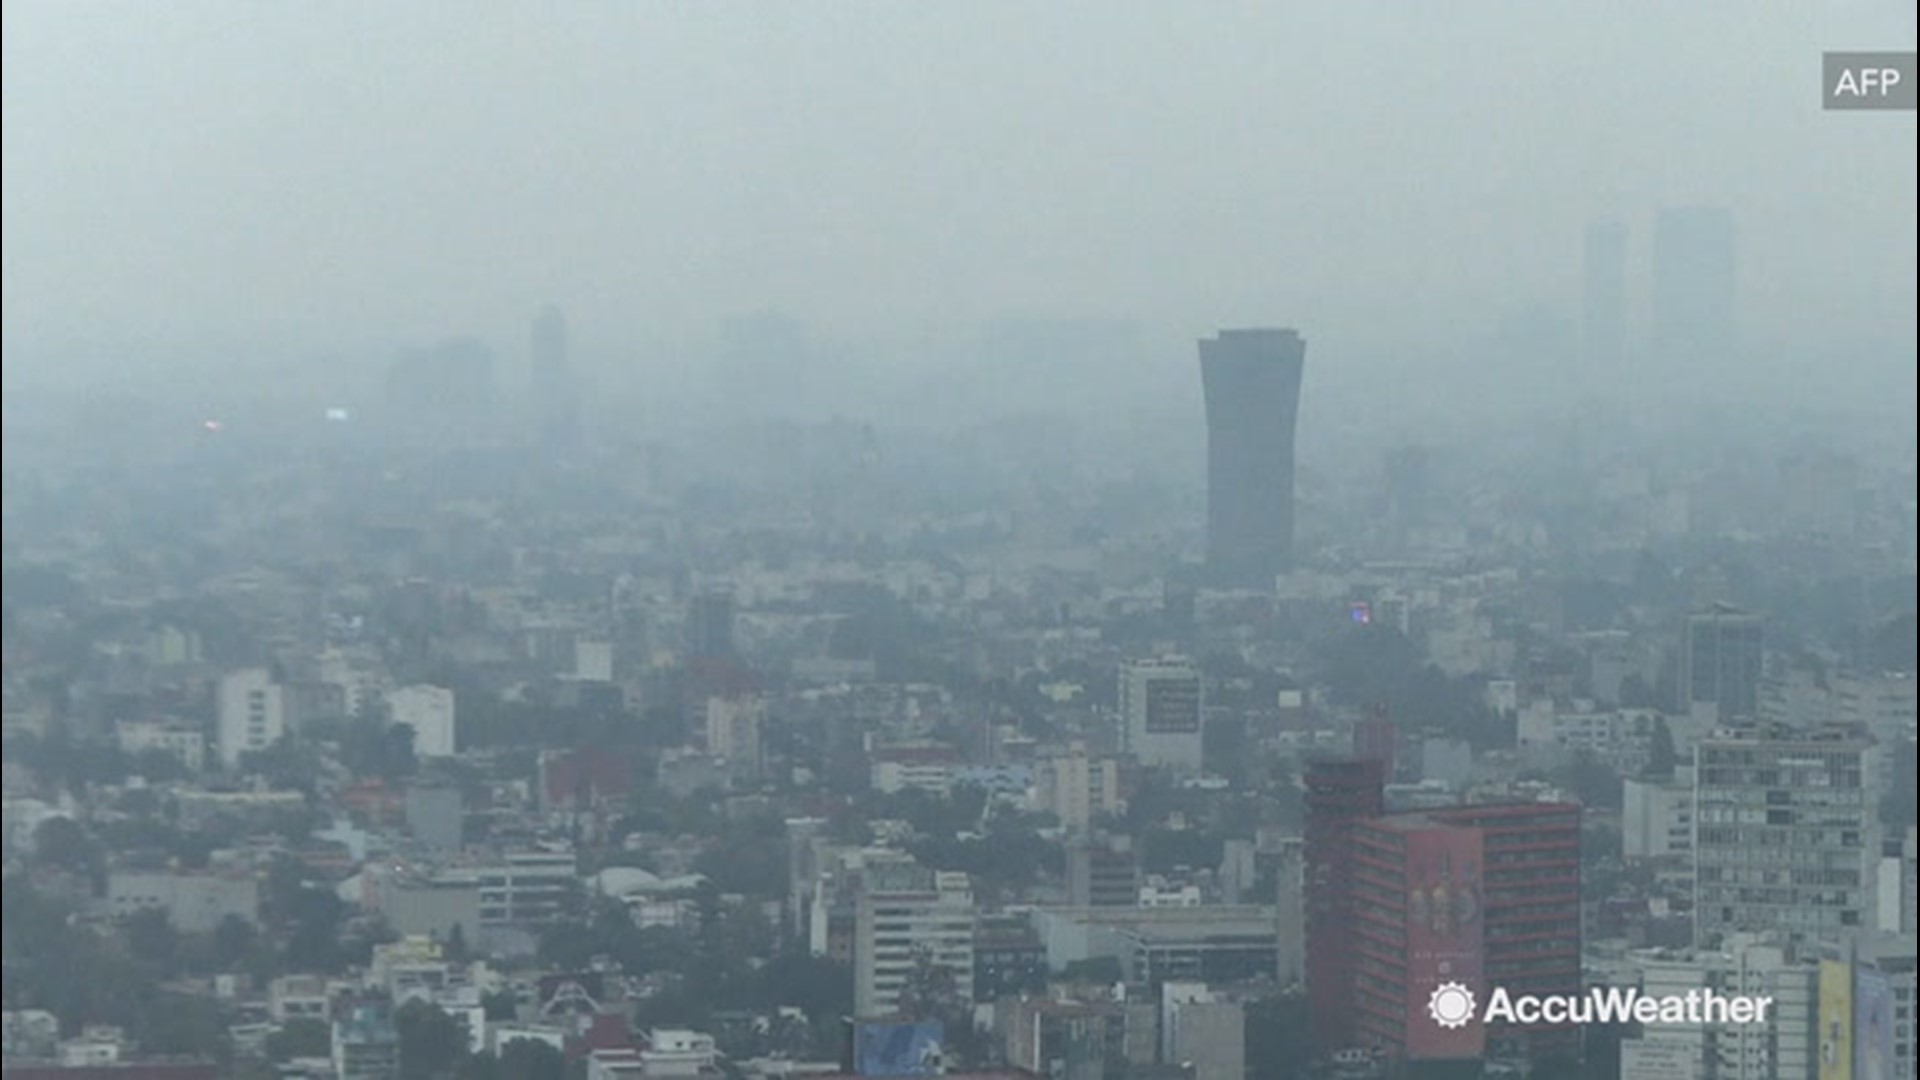 Air Pollution Alert Issued As Smog Fills The Skies Over Mexico City 4552